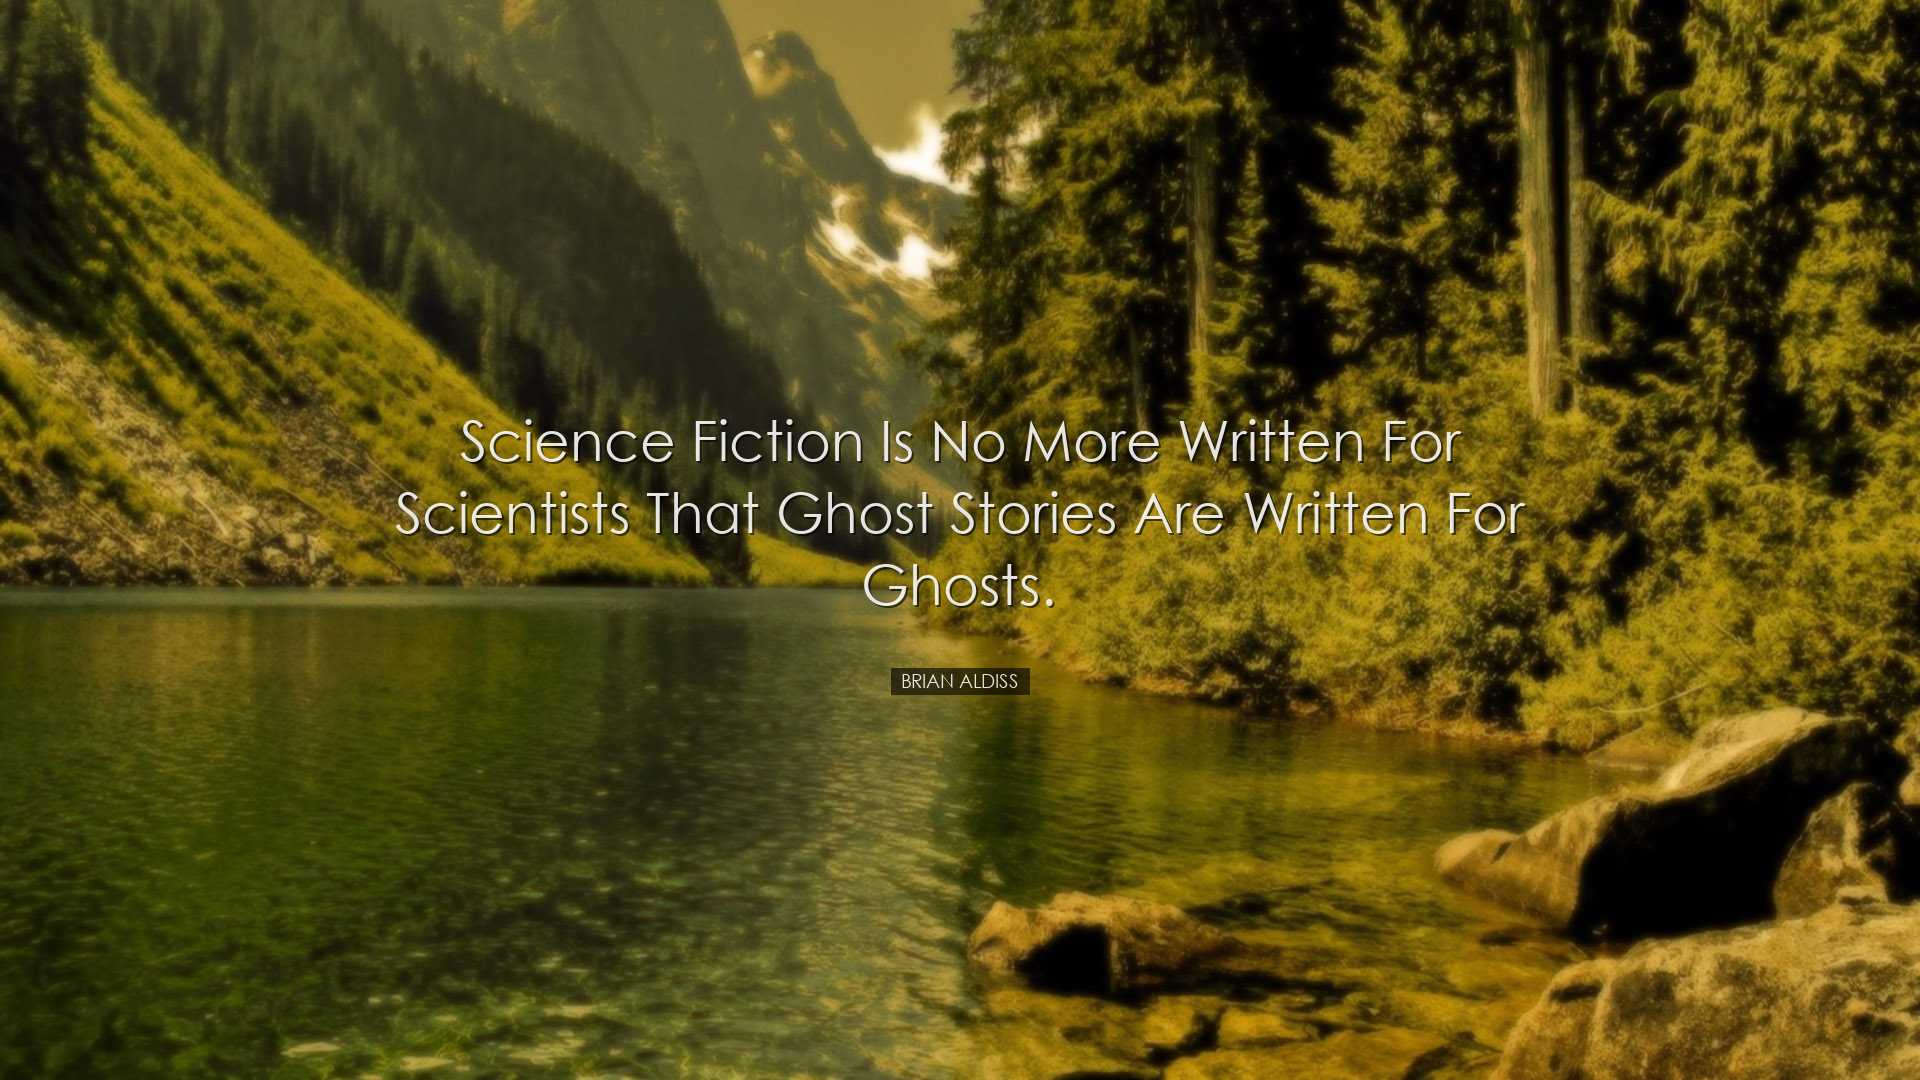 Science fiction is no more written for scientists that ghost stori